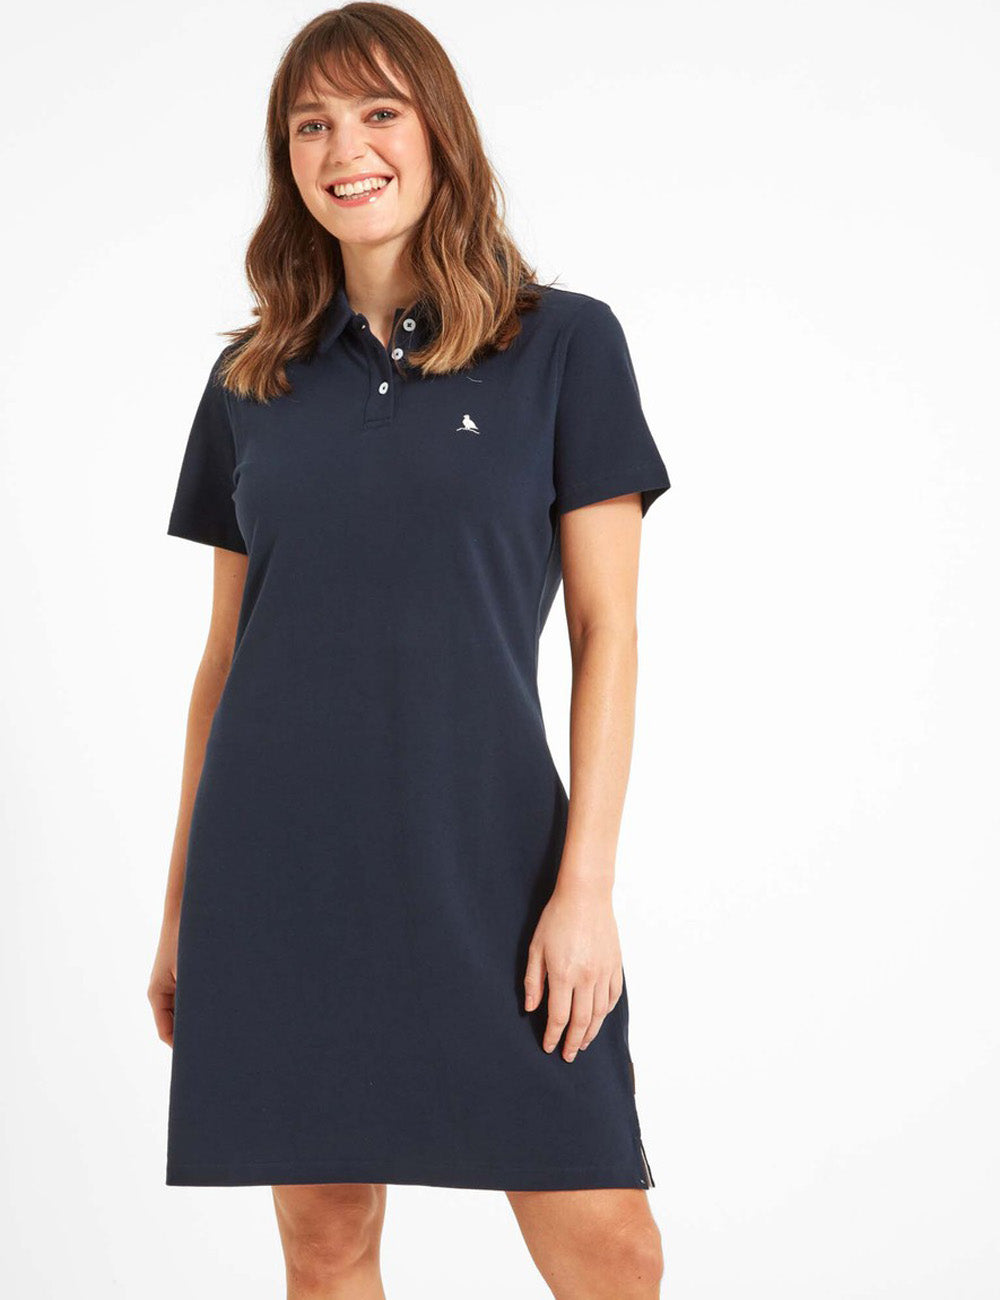 Woman wearing the St. Ives Polo Dress